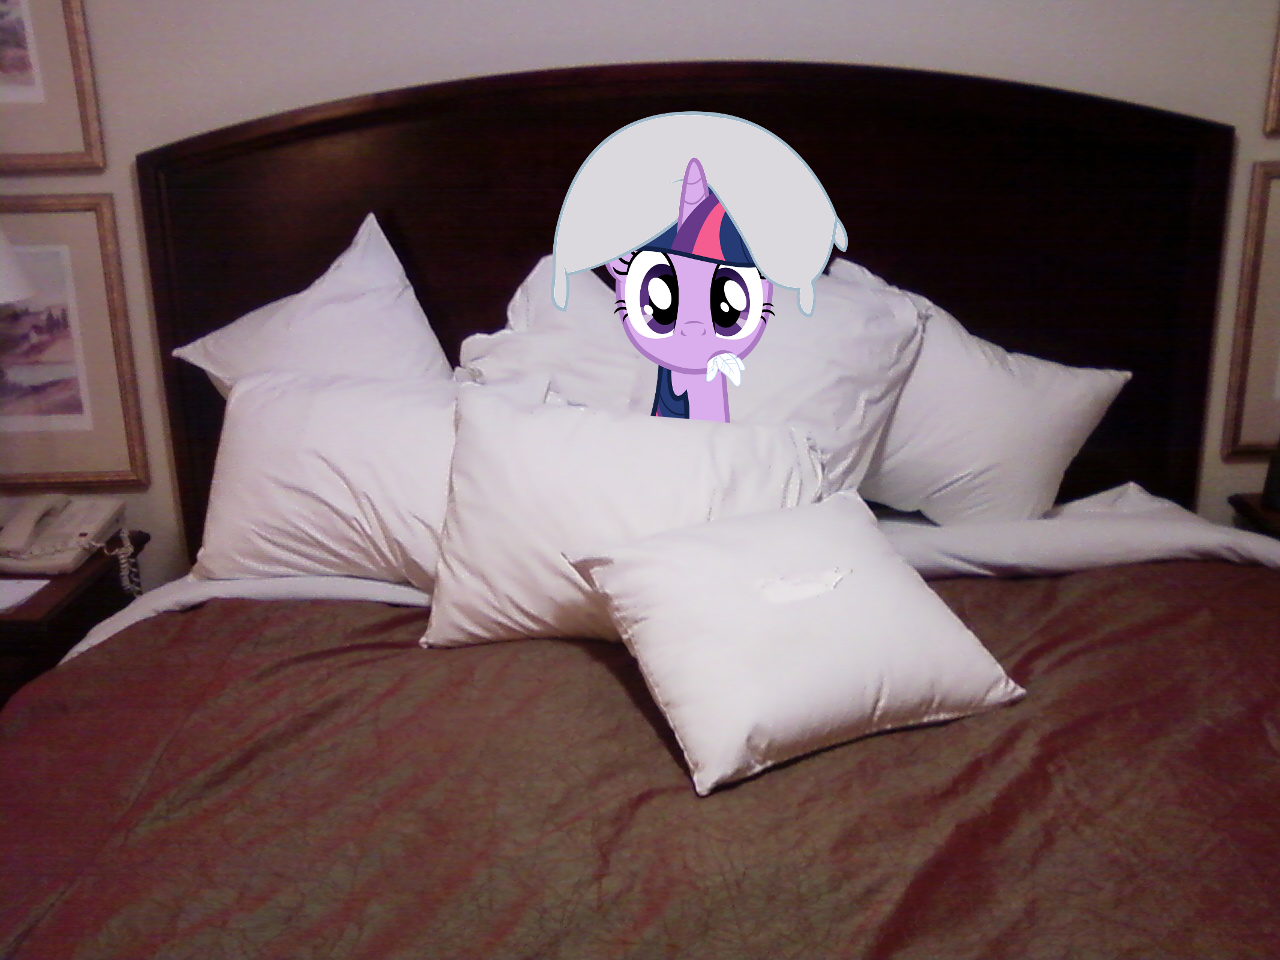 Twilight and Pillows by Bryal